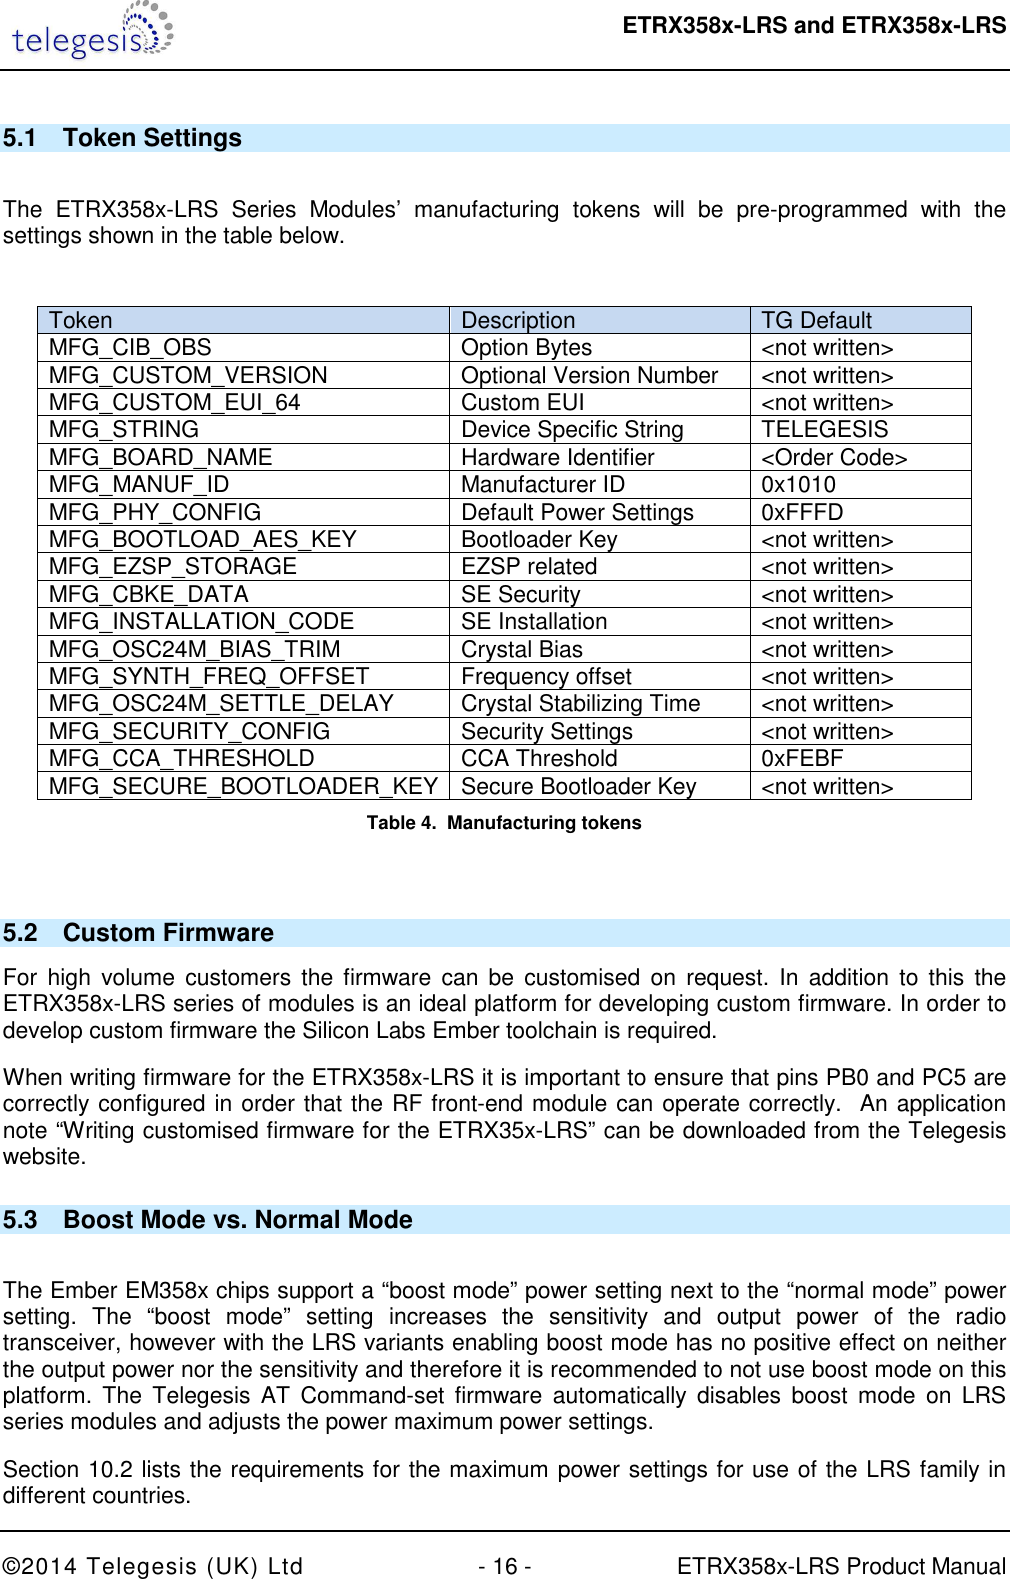  ETRX358x-LRS and ETRX358x-LRS  ©2014 Telegesis (UK) Ltd  - 16 -  ETRX358x-LRS Product Manual 5.1  Token Settings  The  ETRX358x-LRS  Series  Modules’  manufacturing  tokens  will  be  pre-programmed  with  the settings shown in the table below.   Token  Description  TG Default  MFG_CIB_OBS  Option Bytes  &lt;not written&gt; MFG_CUSTOM_VERSION  Optional Version Number  &lt;not written&gt; MFG_CUSTOM_EUI_64  Custom EUI  &lt;not written&gt; MFG_STRING  Device Specific String  TELEGESIS MFG_BOARD_NAME  Hardware Identifier  &lt;Order Code&gt; MFG_MANUF_ID  Manufacturer ID  0x1010 MFG_PHY_CONFIG  Default Power Settings  0xFFFD MFG_BOOTLOAD_AES_KEY  Bootloader Key  &lt;not written&gt; MFG_EZSP_STORAGE  EZSP related  &lt;not written&gt; MFG_CBKE_DATA  SE Security  &lt;not written&gt; MFG_INSTALLATION_CODE  SE Installation  &lt;not written&gt; MFG_OSC24M_BIAS_TRIM  Crystal Bias  &lt;not written&gt; MFG_SYNTH_FREQ_OFFSET  Frequency offset  &lt;not written&gt; MFG_OSC24M_SETTLE_DELAY  Crystal Stabilizing Time  &lt;not written&gt; MFG_SECURITY_CONFIG  Security Settings  &lt;not written&gt; MFG_CCA_THRESHOLD  CCA Threshold  0xFEBF MFG_SECURE_BOOTLOADER_KEY Secure Bootloader Key  &lt;not written&gt; Table 4.  Manufacturing tokens  5.2  Custom Firmware For  high  volume  customers the  firmware  can  be  customised on  request. In  addition  to this  the ETRX358x-LRS series of modules is an ideal platform for developing custom firmware. In order to develop custom firmware the Silicon Labs Ember toolchain is required. When writing firmware for the ETRX358x-LRS it is important to ensure that pins PB0 and PC5 are correctly configured in order that the RF front-end module can operate correctly.  An application note “Writing customised firmware for the ETRX35x-LRS” can be downloaded from the Telegesis website. 5.3  Boost Mode vs. Normal Mode  The Ember EM358x chips support a “boost mode” power setting next to the “normal mode” power setting.  The  “boost  mode”  setting  increases  the  sensitivity  and  output  power  of  the  radio transceiver, however with the LRS variants enabling boost mode has no positive effect on neither the output power nor the sensitivity and therefore it is recommended to not use boost mode on this platform.  The Telegesis  AT  Command-set firmware  automatically  disables  boost  mode  on  LRS series modules and adjusts the power maximum power settings. Section 10.2 lists the requirements for the maximum power settings for use of the LRS family in different countries. 